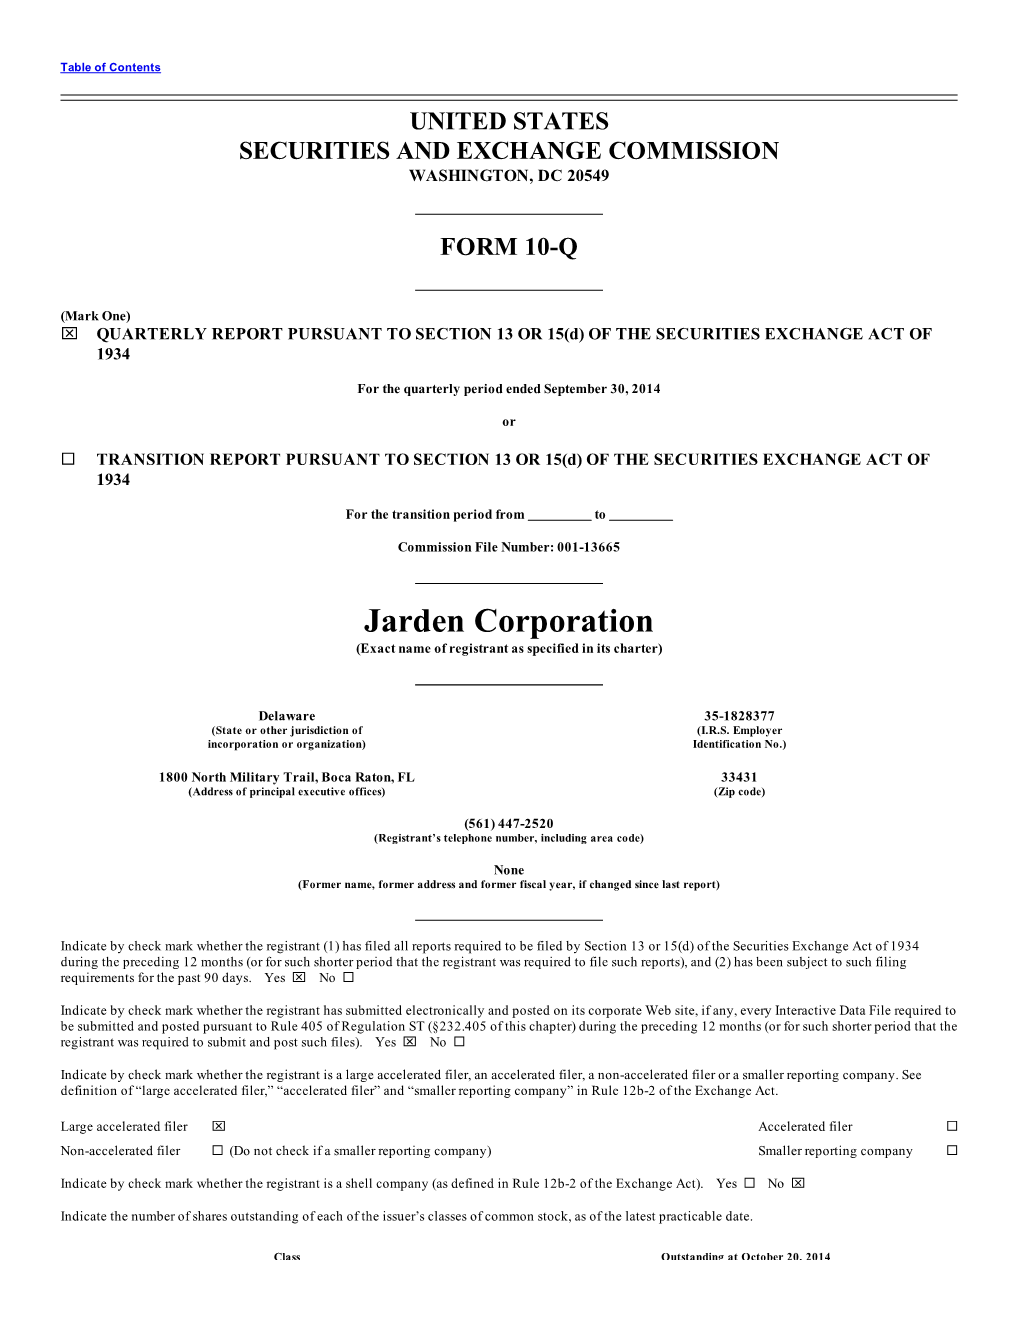 Jarden Corporation (Exact Name of Registrant As Specified in Its Charter)